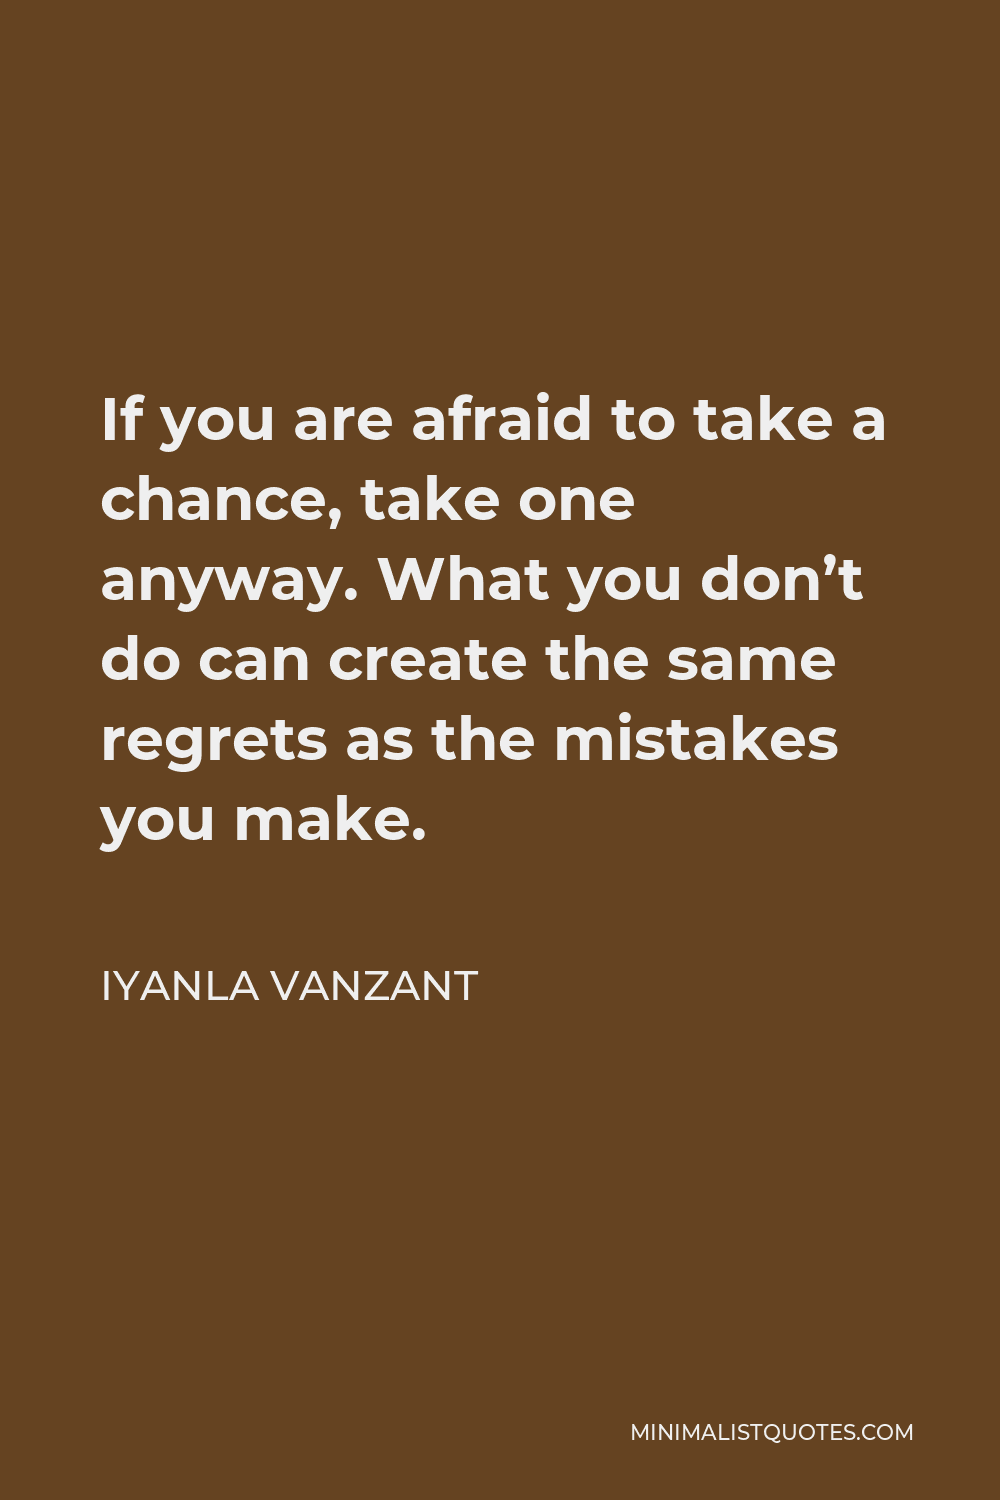 Iyanla Vanzant Quote - If you are afraid to take a chance, take one anyway. What you don’t do can create the same regrets as the mistakes you make.